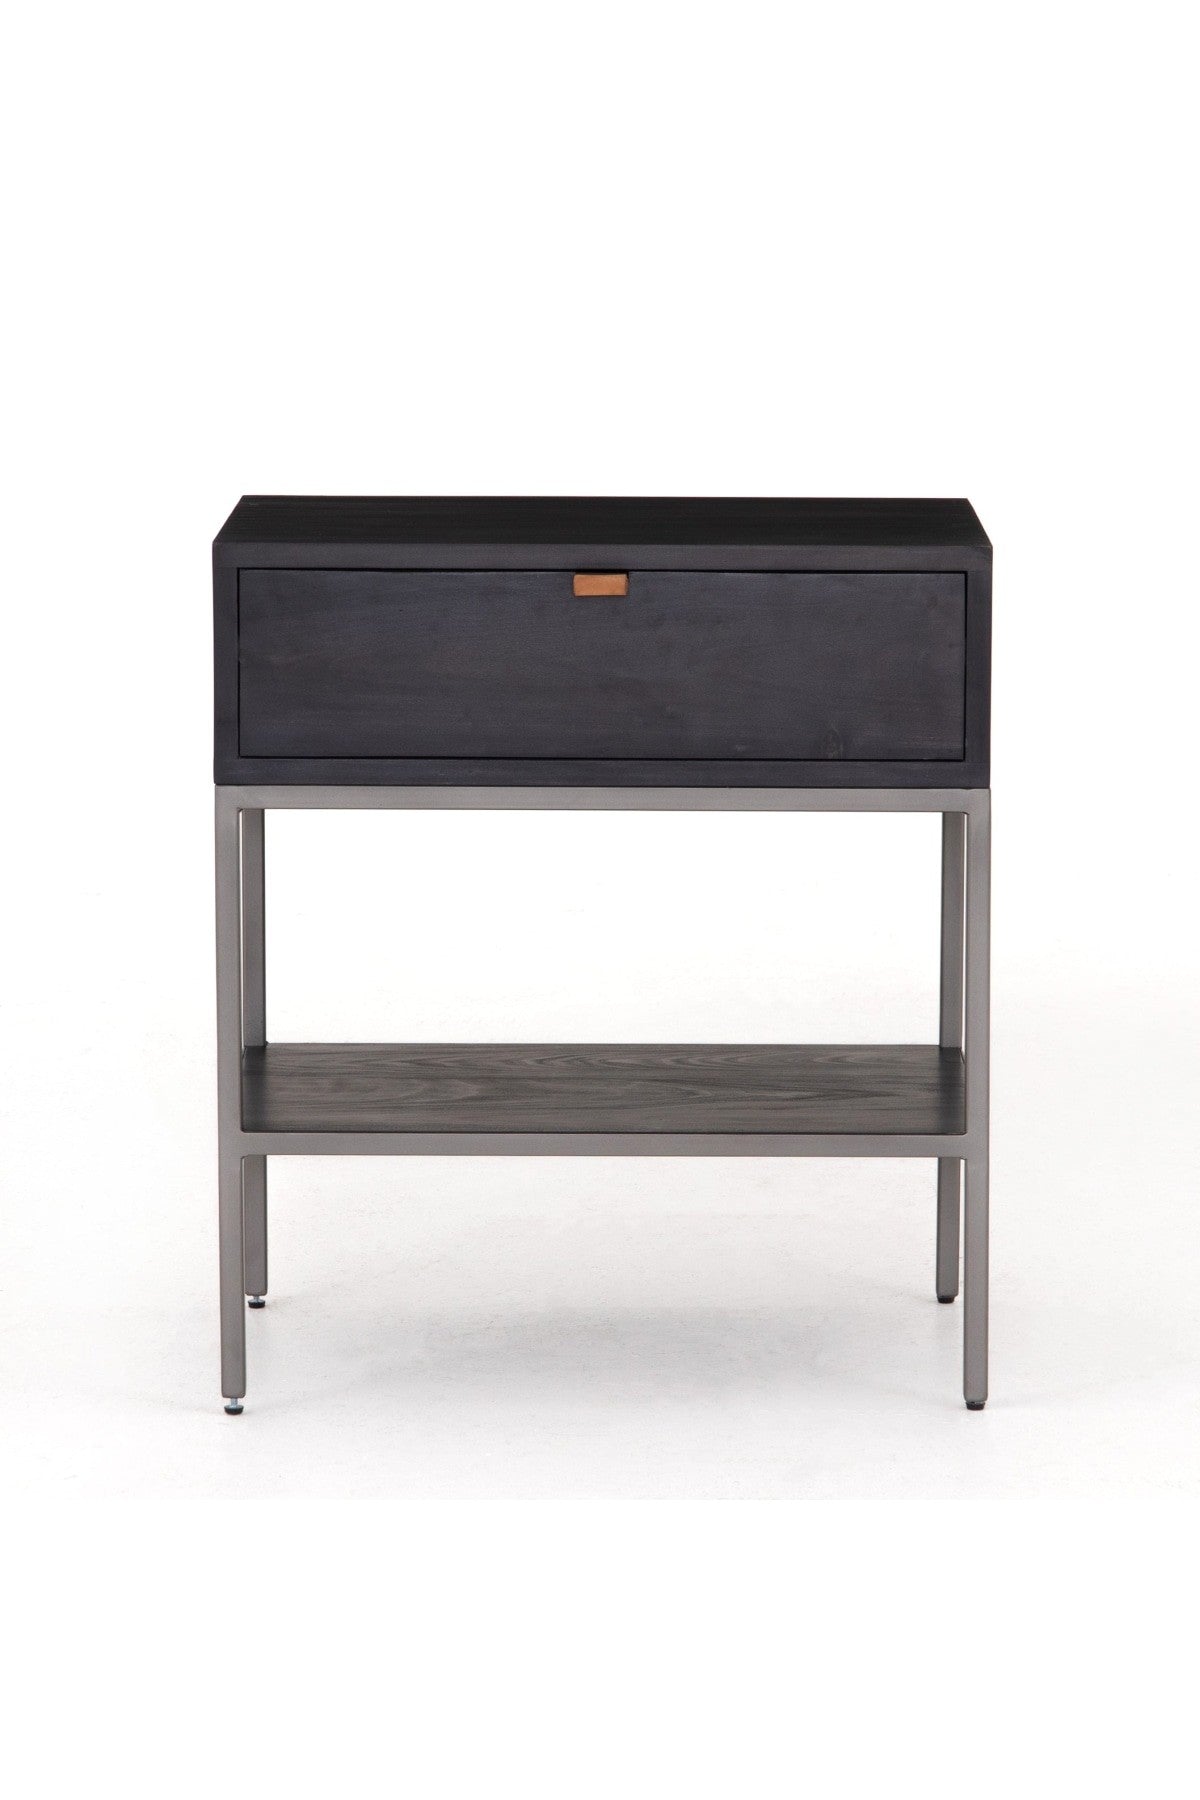 Duncan Nightstand - Washed Black